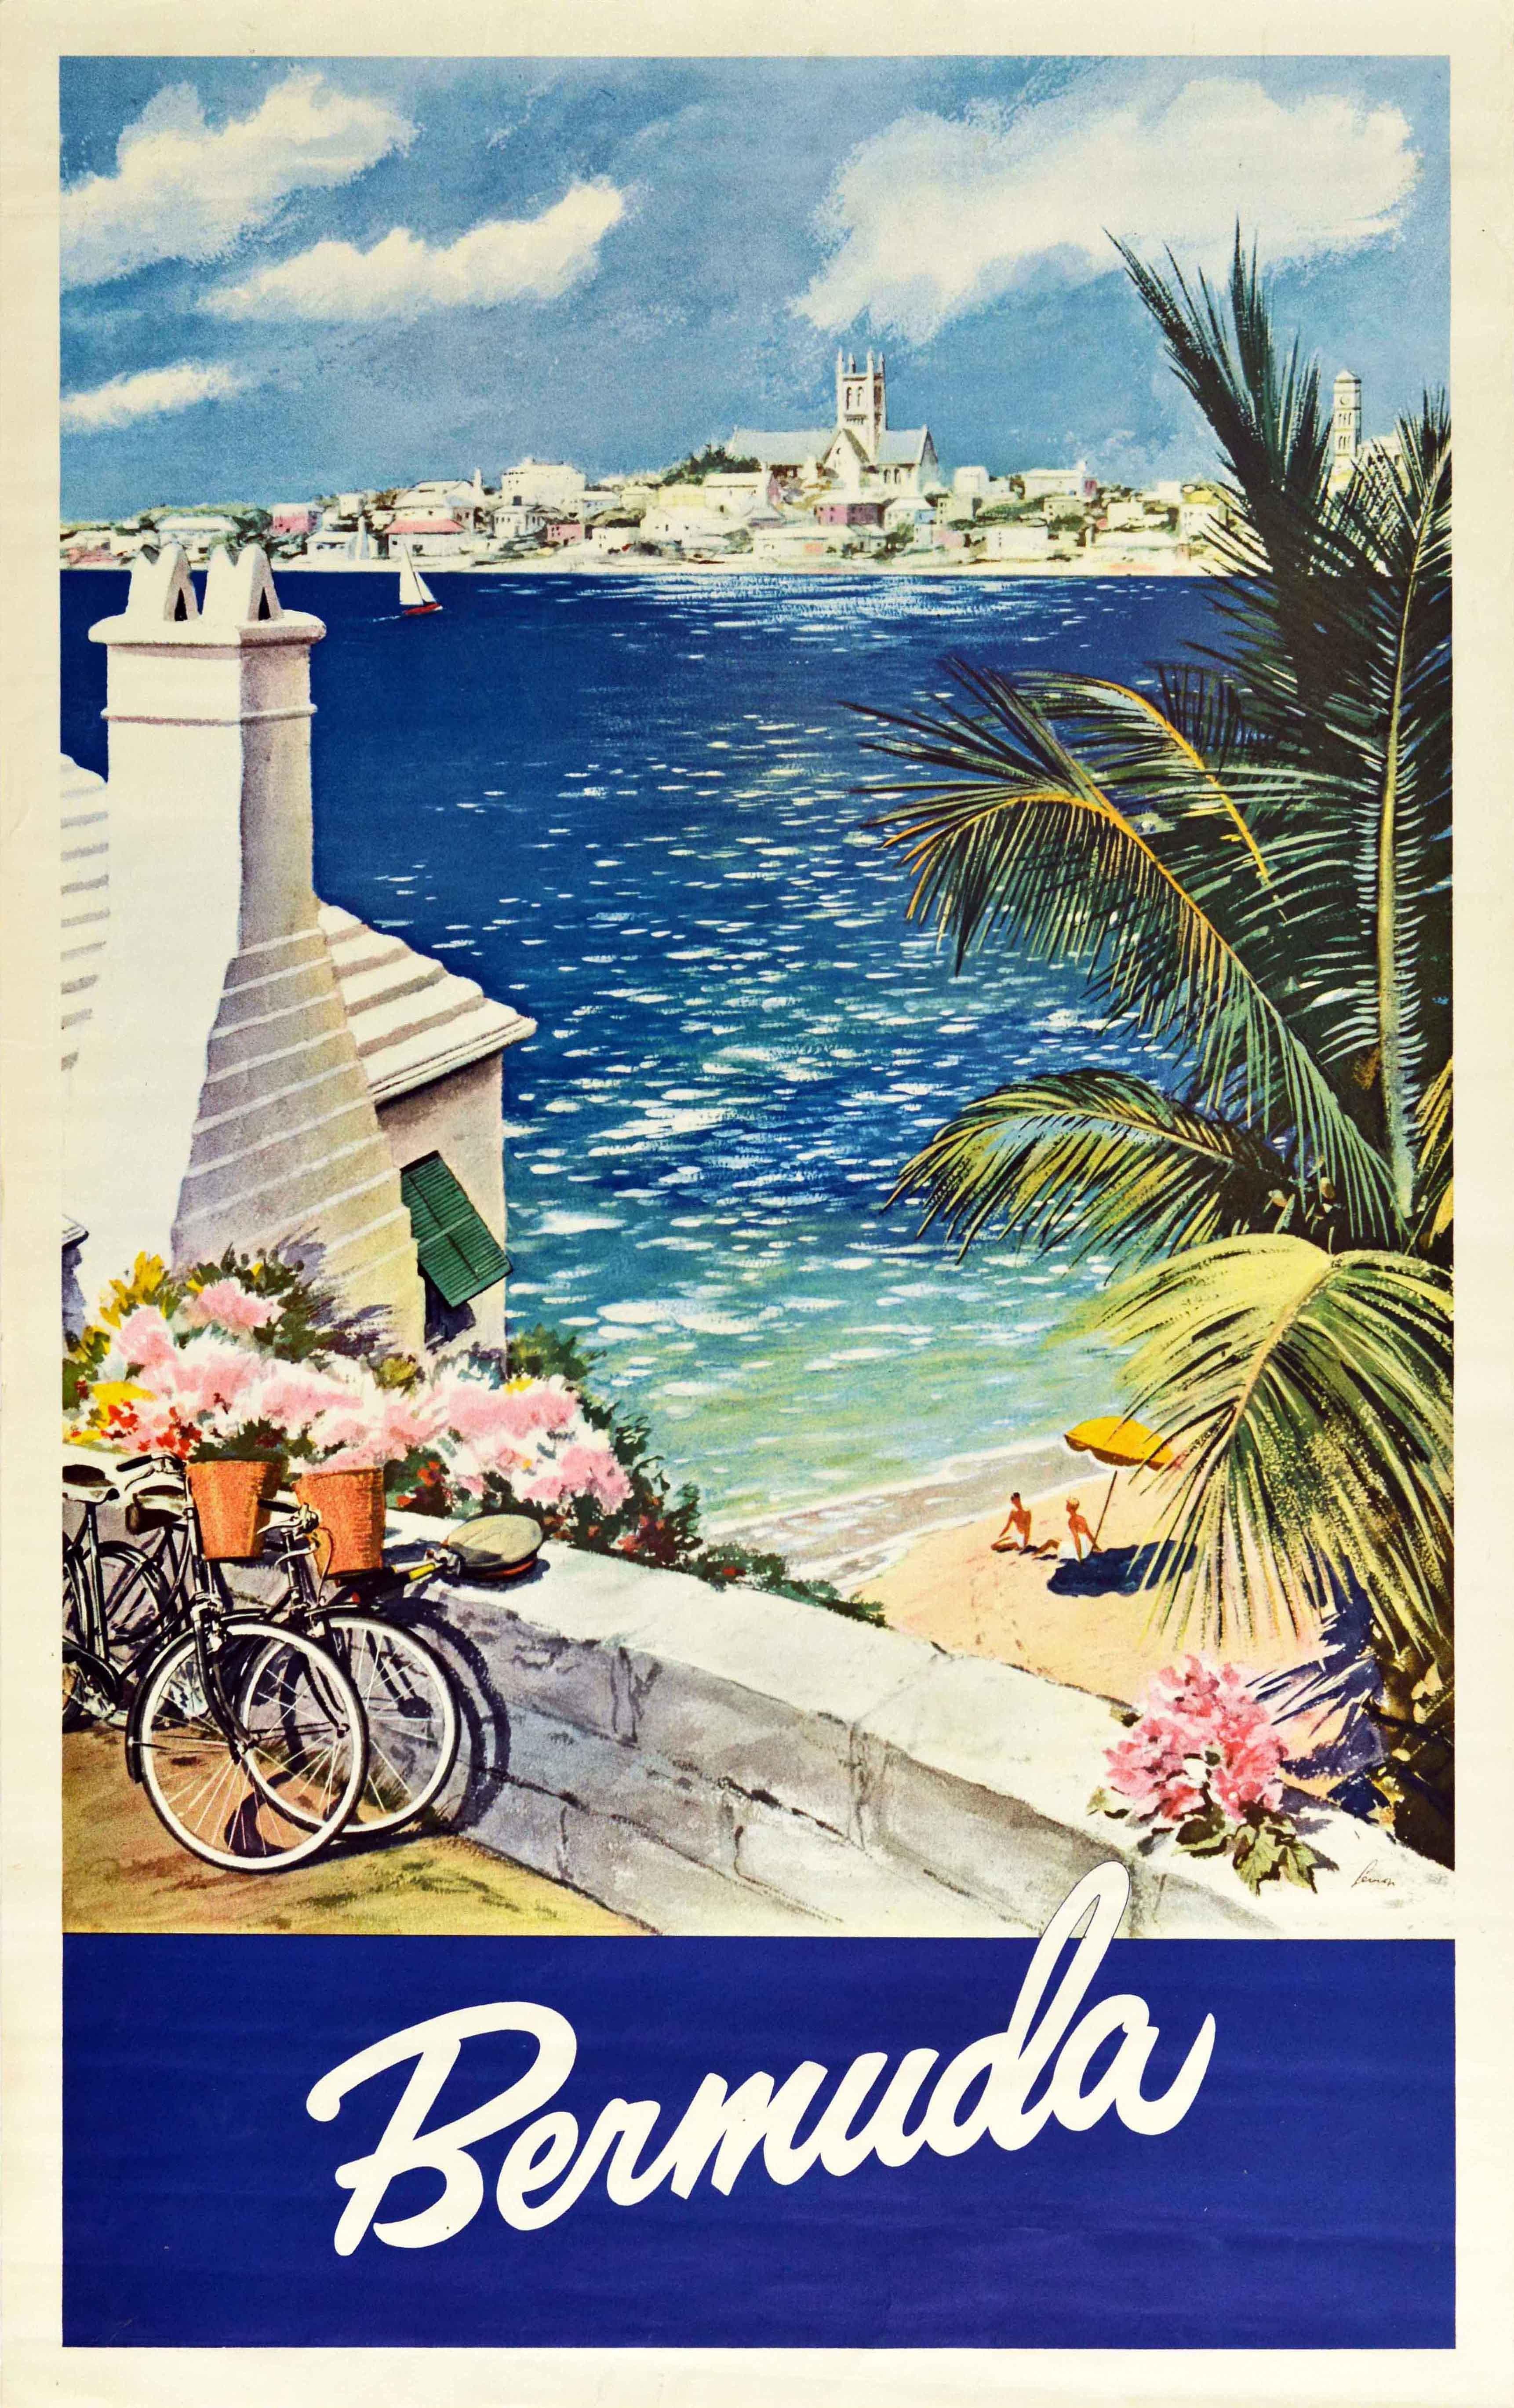 Original vintage travel poster for Bermuda featuring a great illustration of two bikes parked along a seaside road next to pink flowers with people sunbathing under colourful sun umbrellas on the sandy beach and a palm tree on the side, a sailing